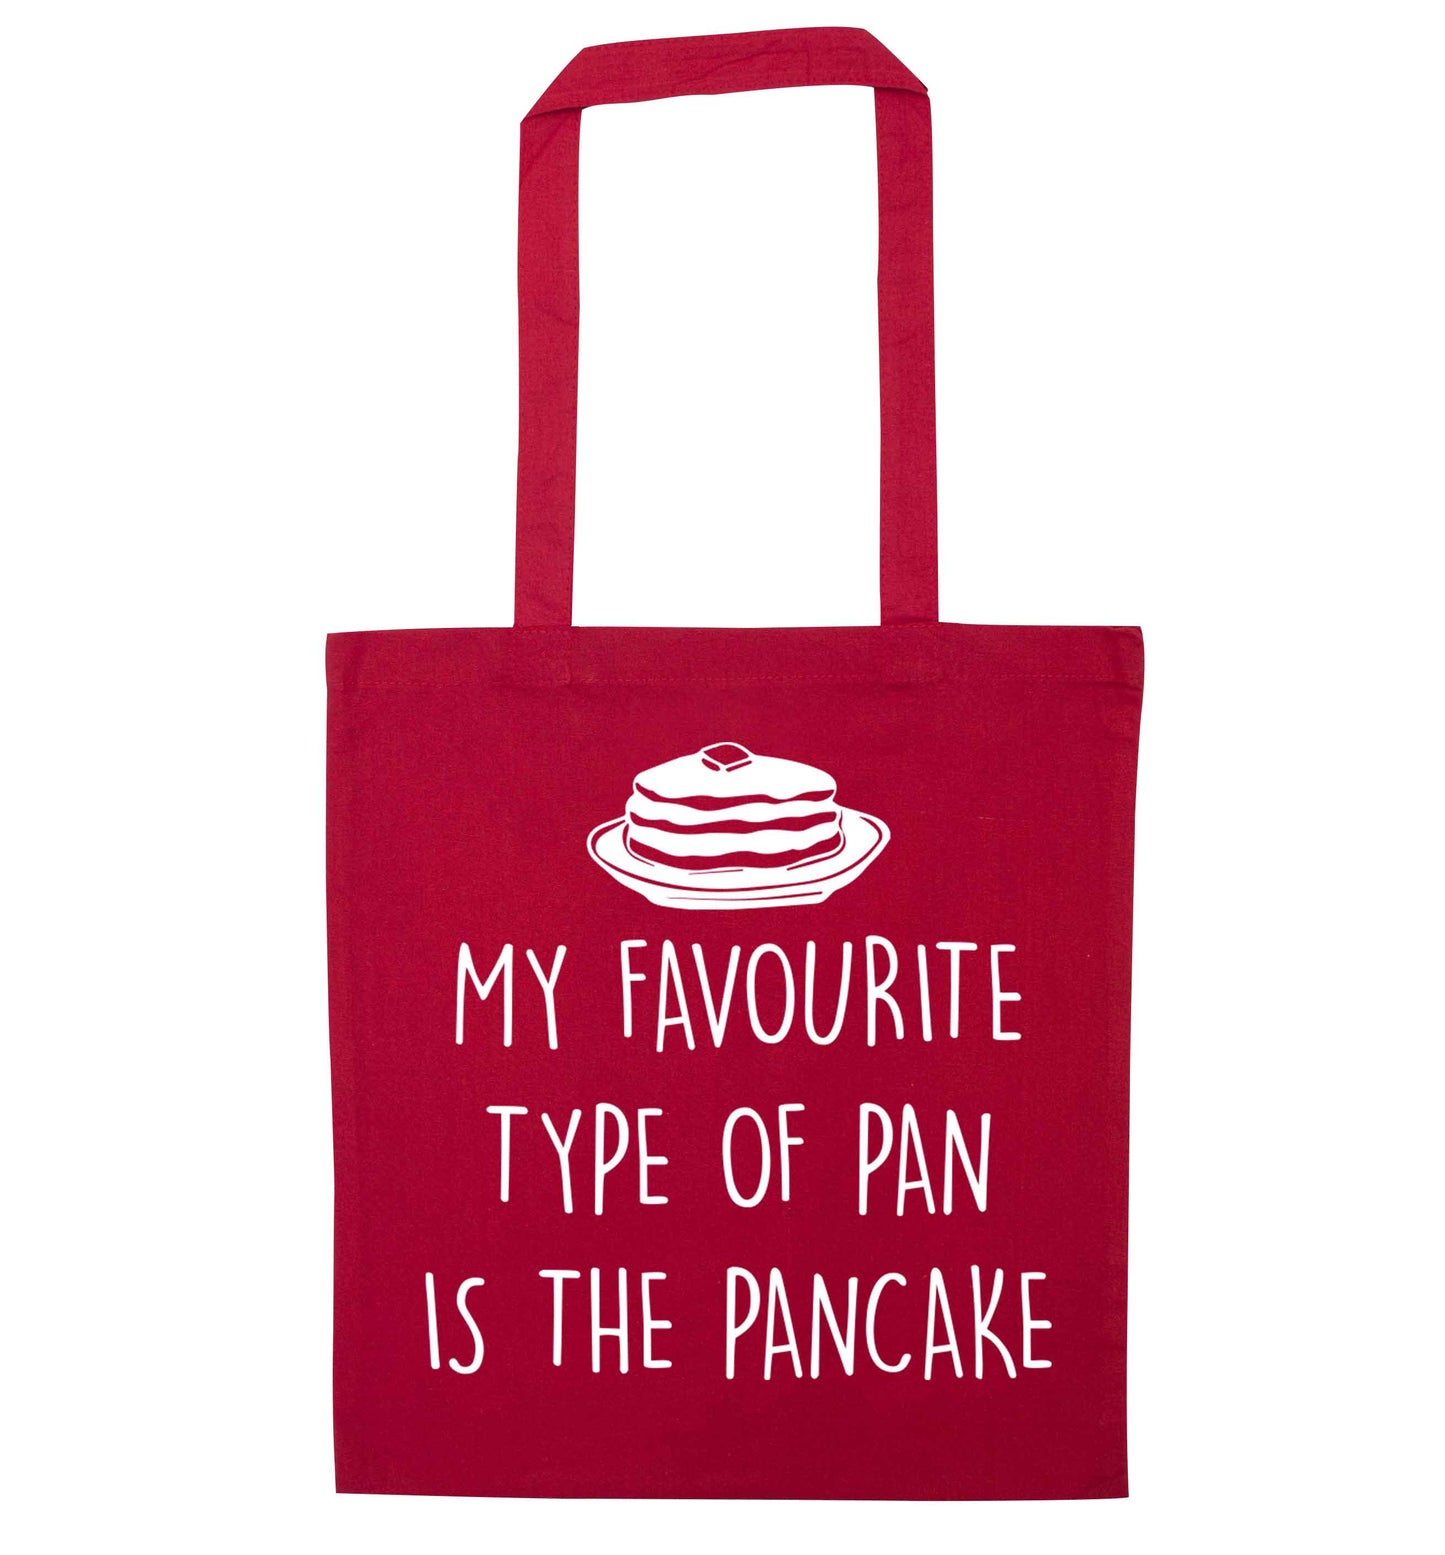 My favourite type of pan is the pancake red tote bag